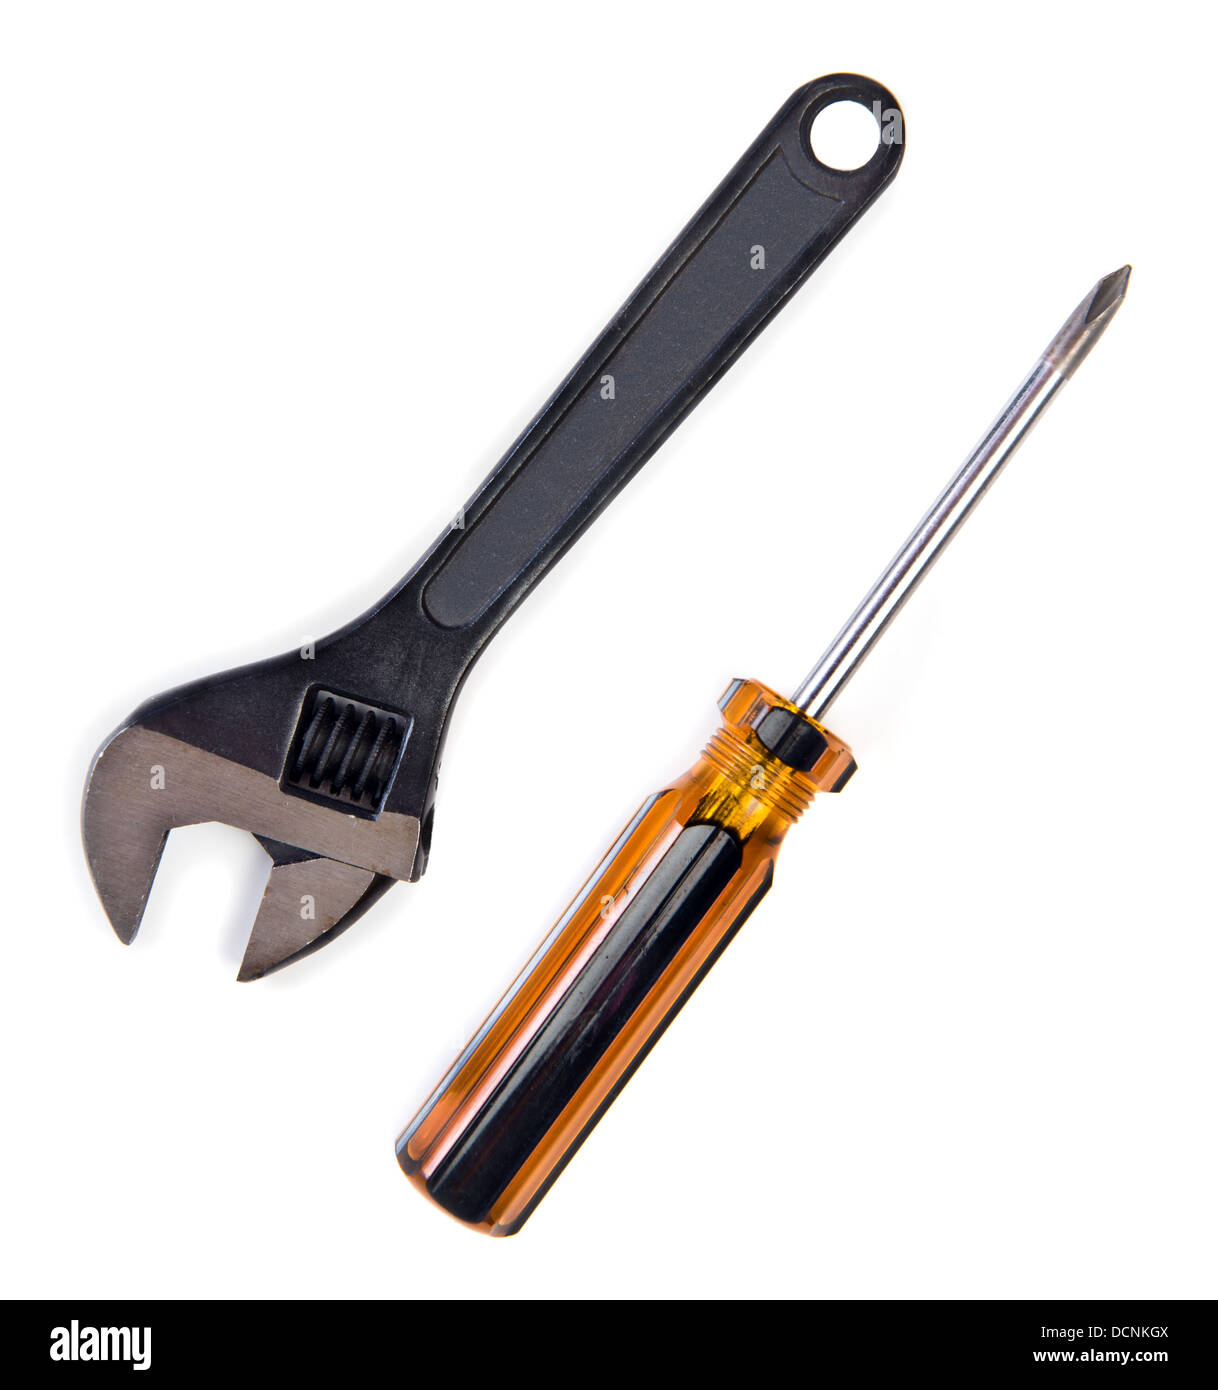 adjustable wrench and screwdriver tool kit isolated over white Stock Photo